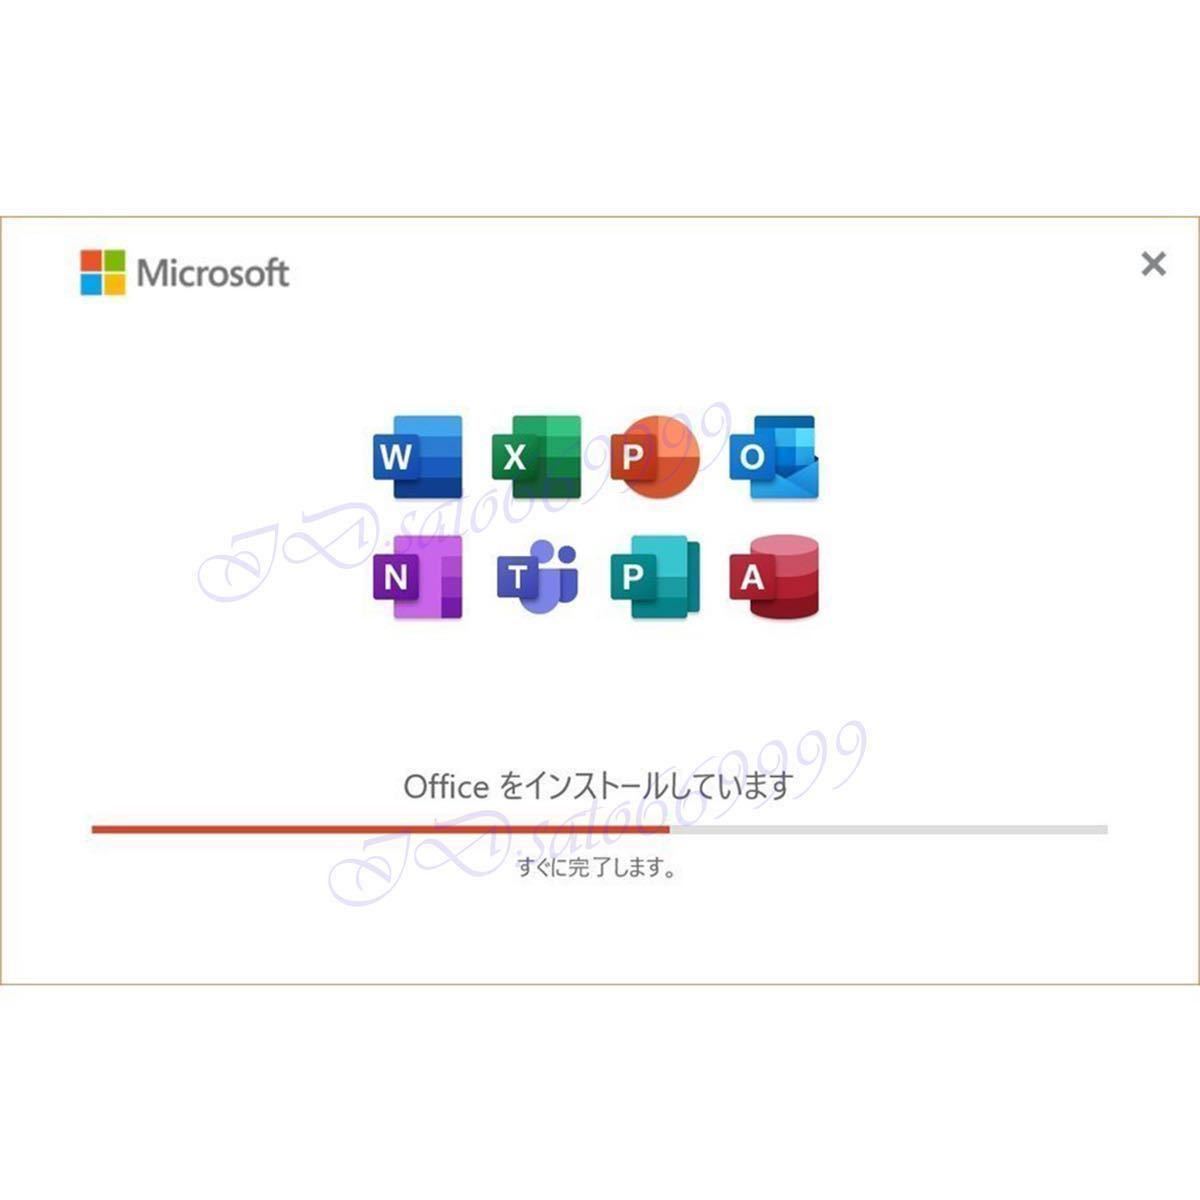 【5PC用】Microsoft Office 2021 Professional Plus 永年正規品プロダクトキー☆ Access Word Excel PowerPoint 認証保証日本語手順書付き 